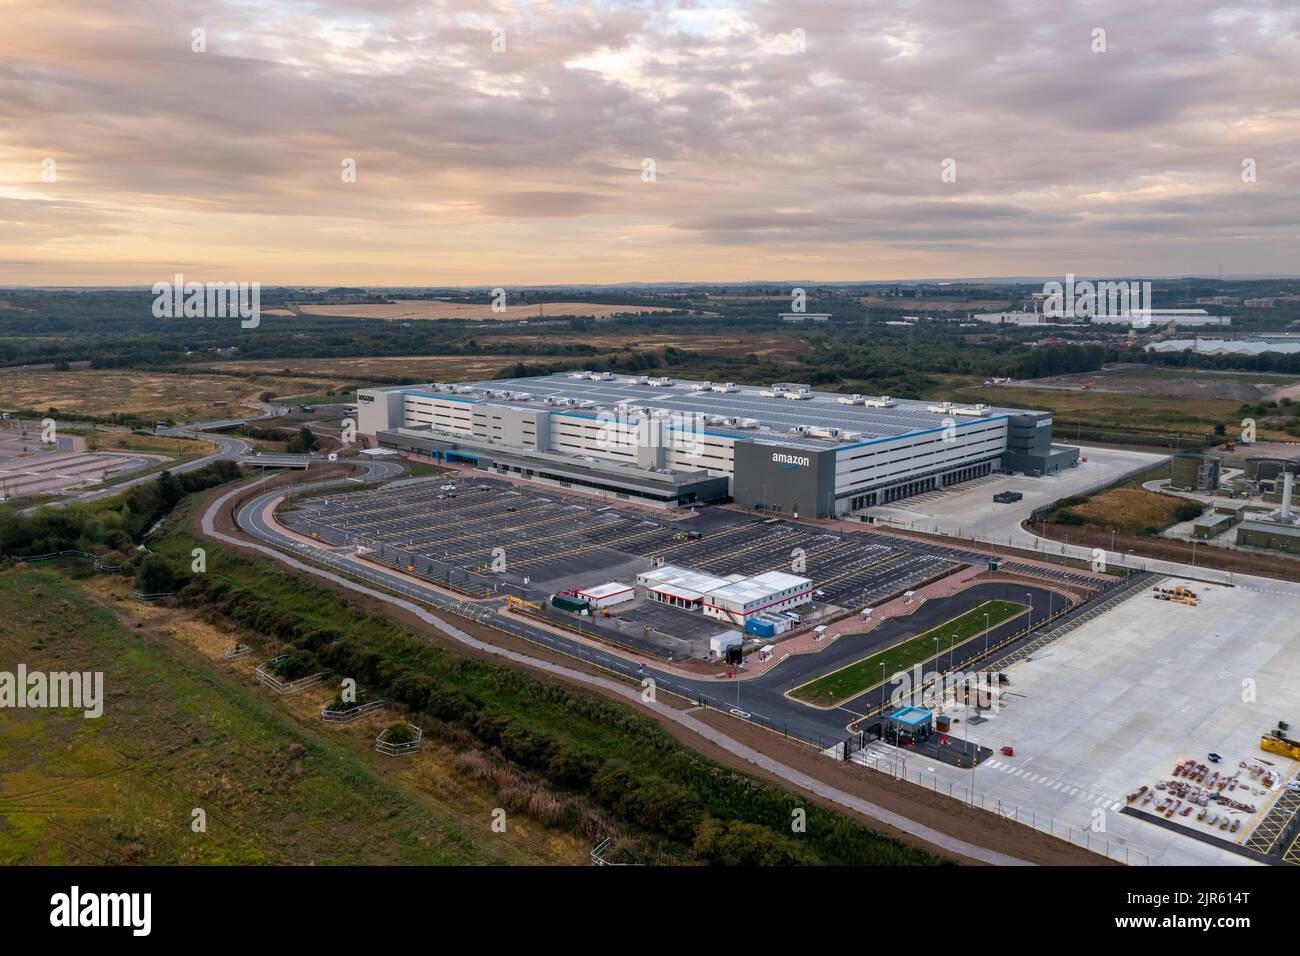 LEEDS, UK - AUGUST 22, 2022. Aerial view of a large Amazon Prime distribution warehouse at Gateway 45 near the M1 motorway in Leeds, UK Stock Photo